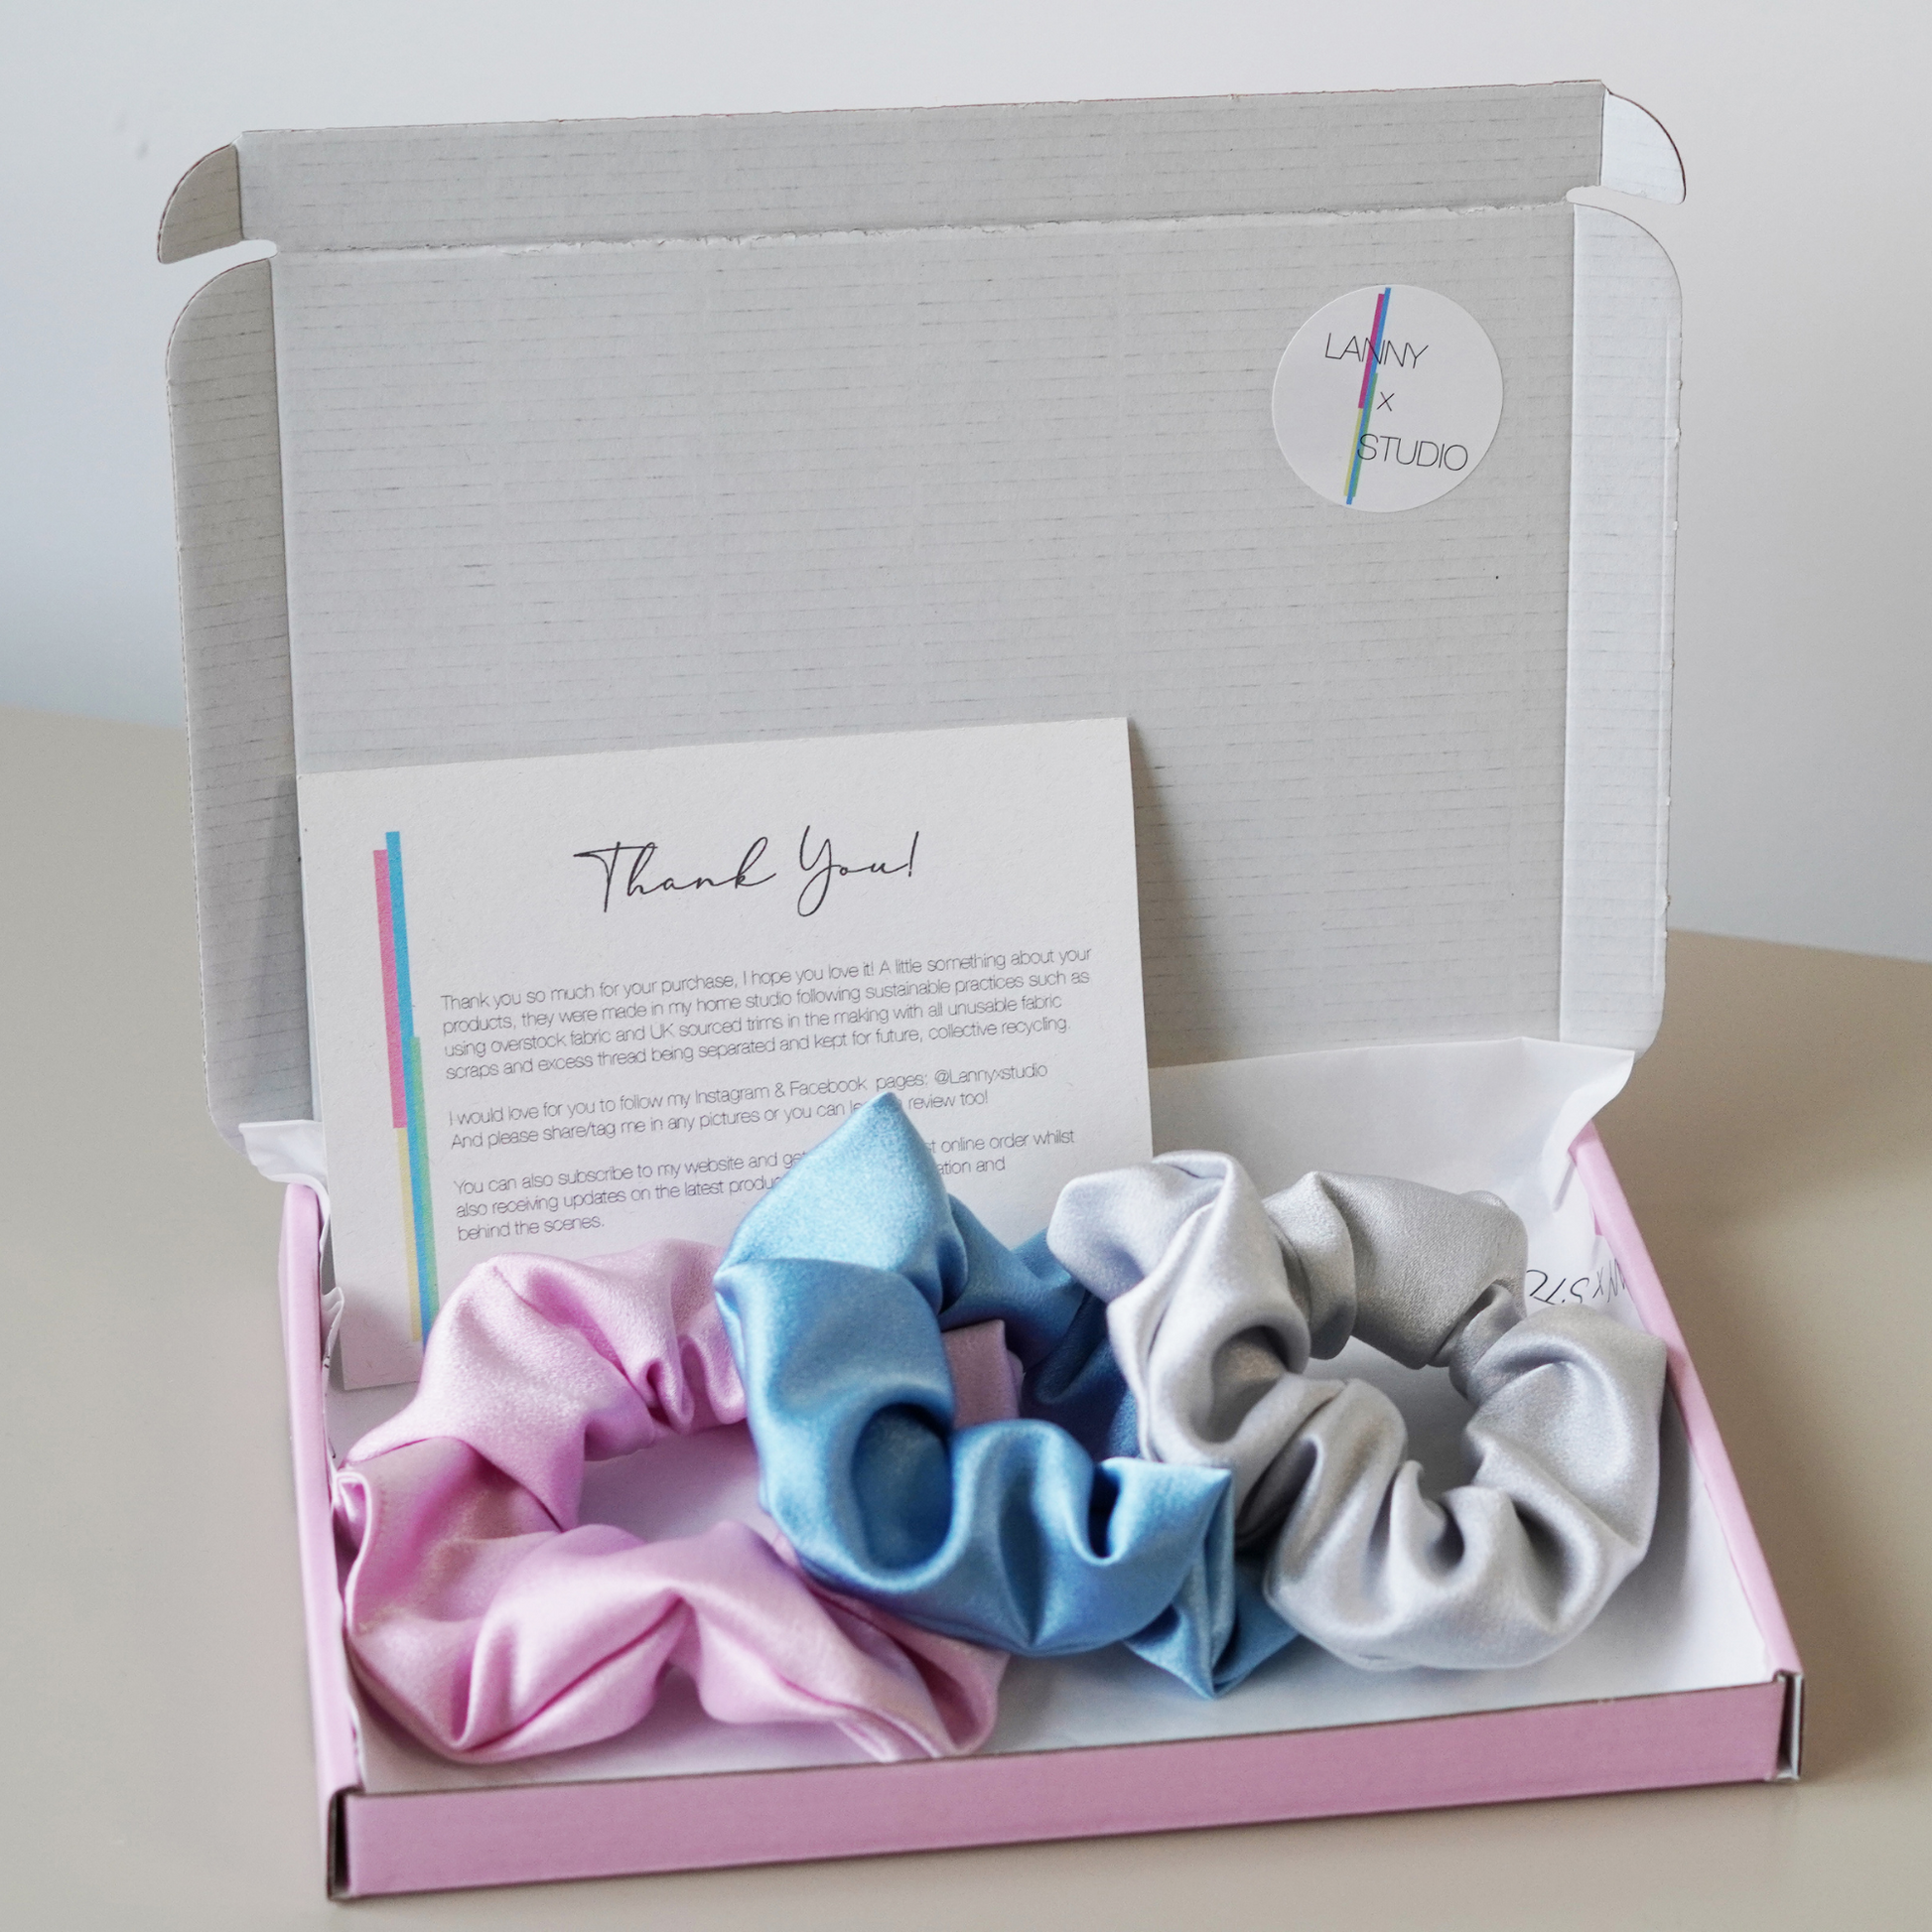 Pink, Blue and Silver satin scrunchies in pink gift box, branded tissue paper and personalised note.